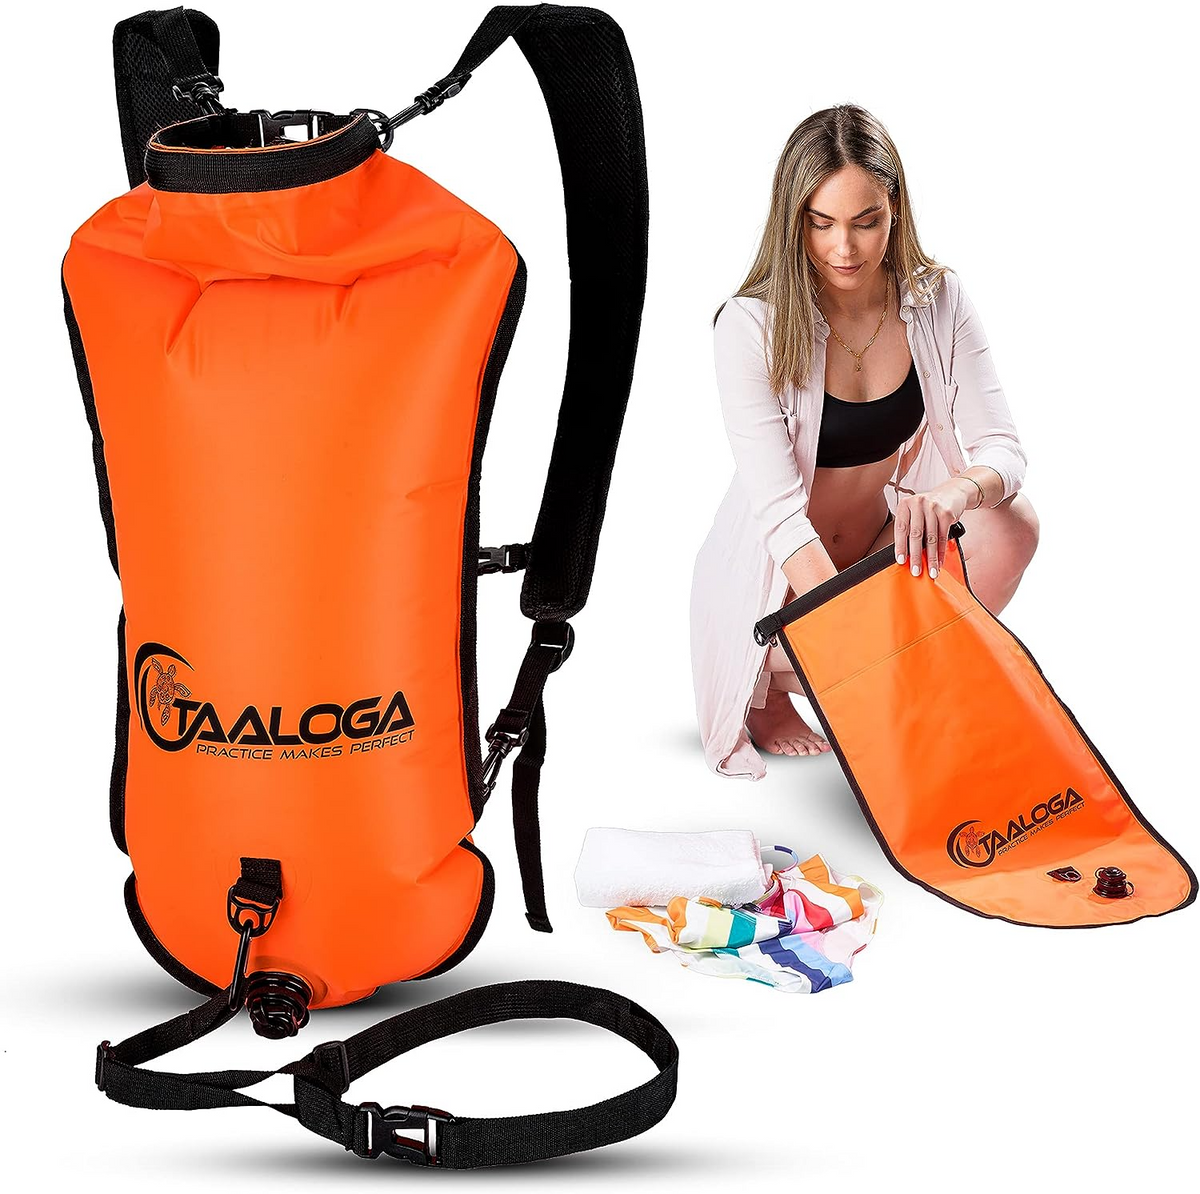 TAALOGA® 2-in-1 Swimming Buoy and Waterproof Backpack